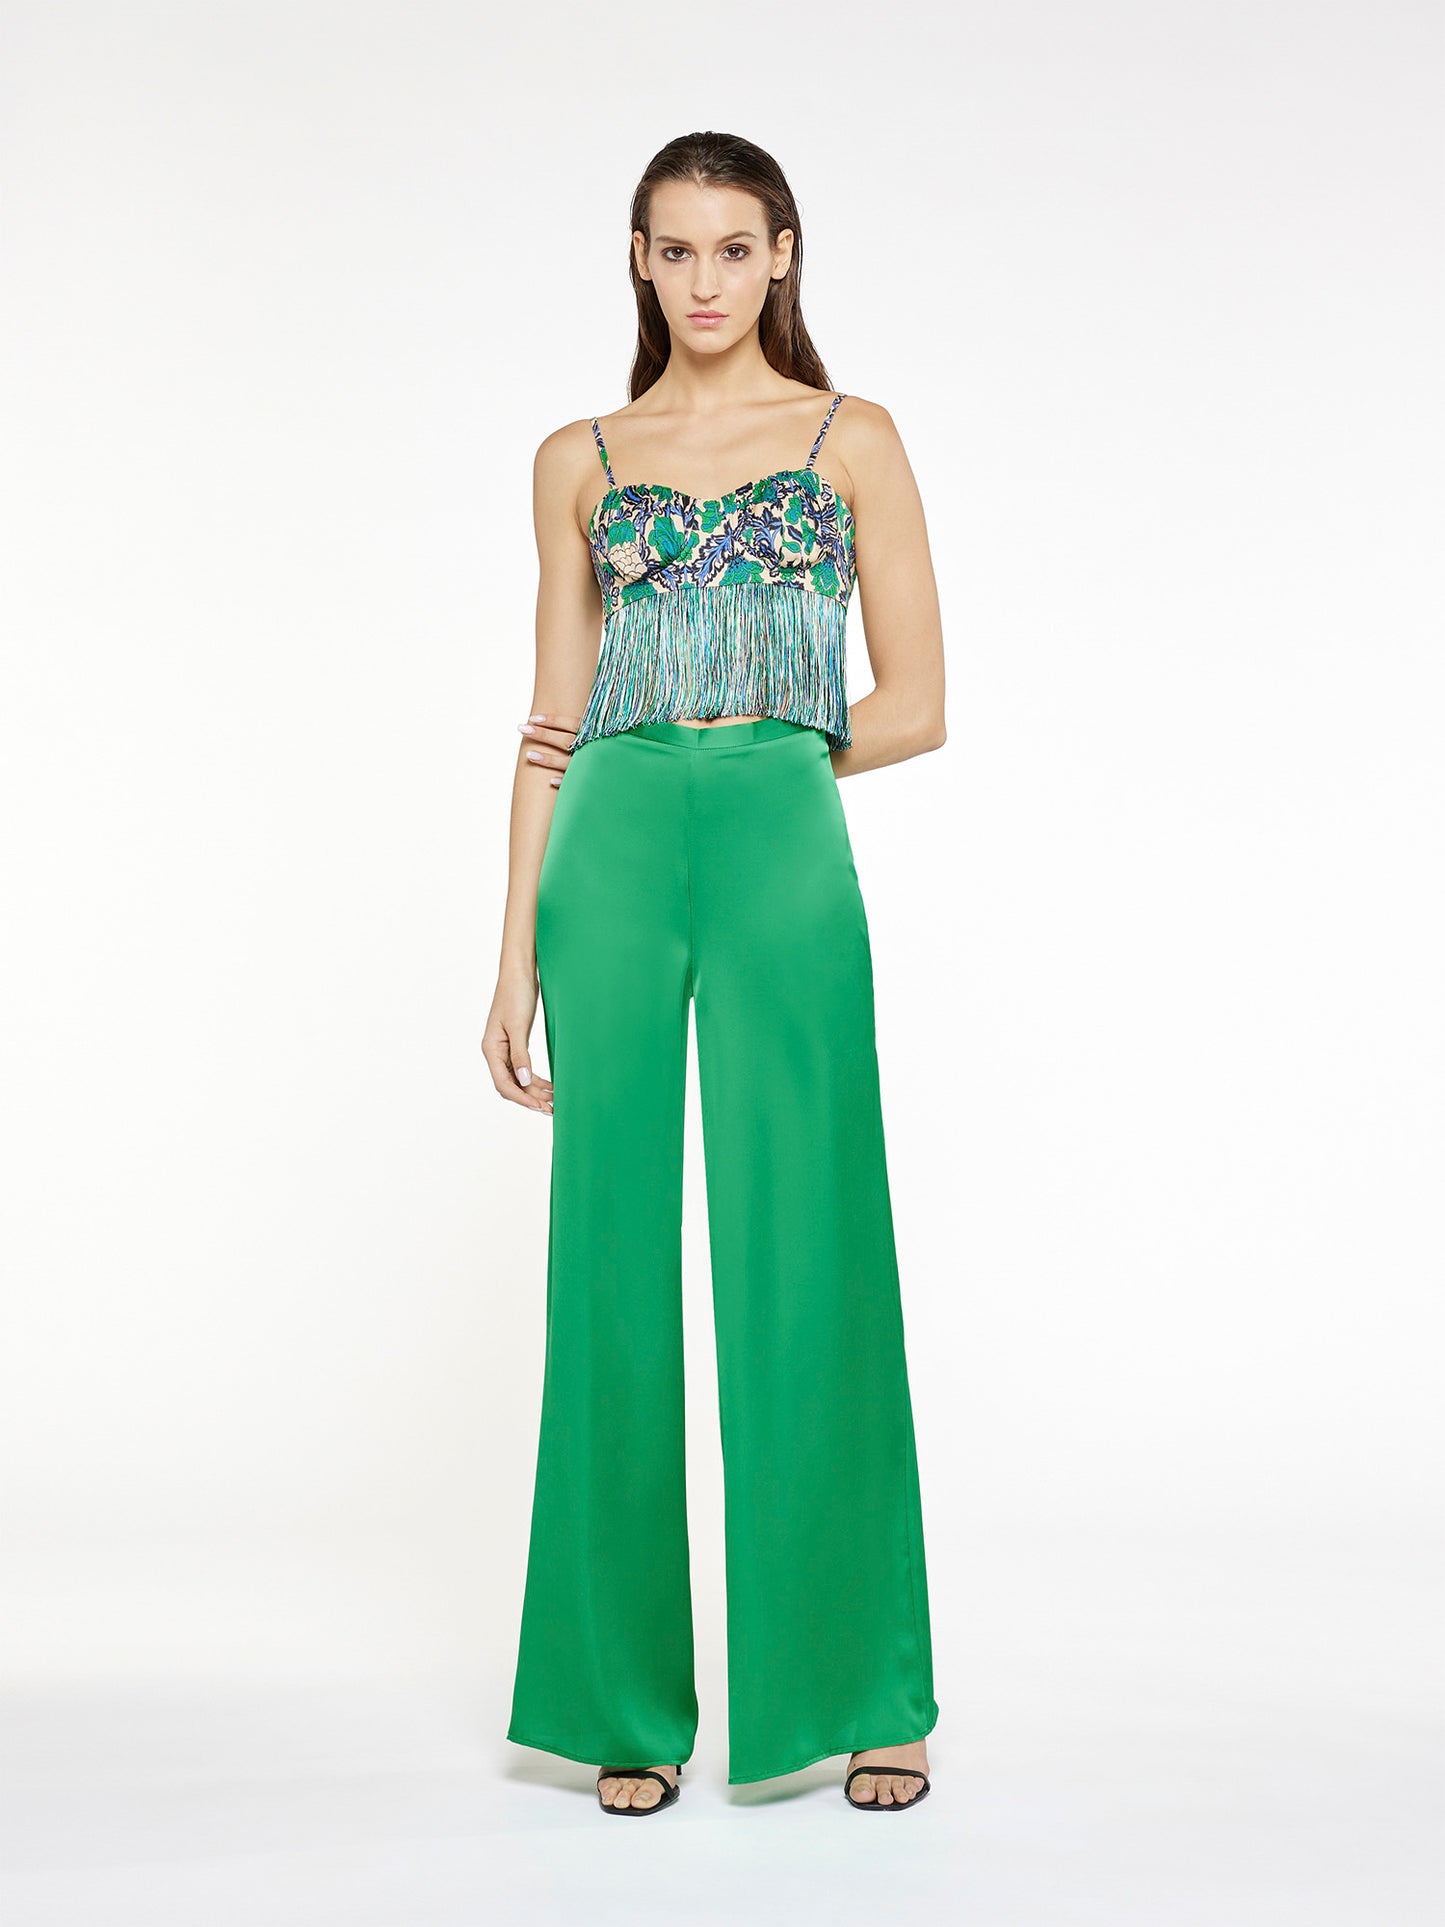 Palazzo trousers in fluid satin